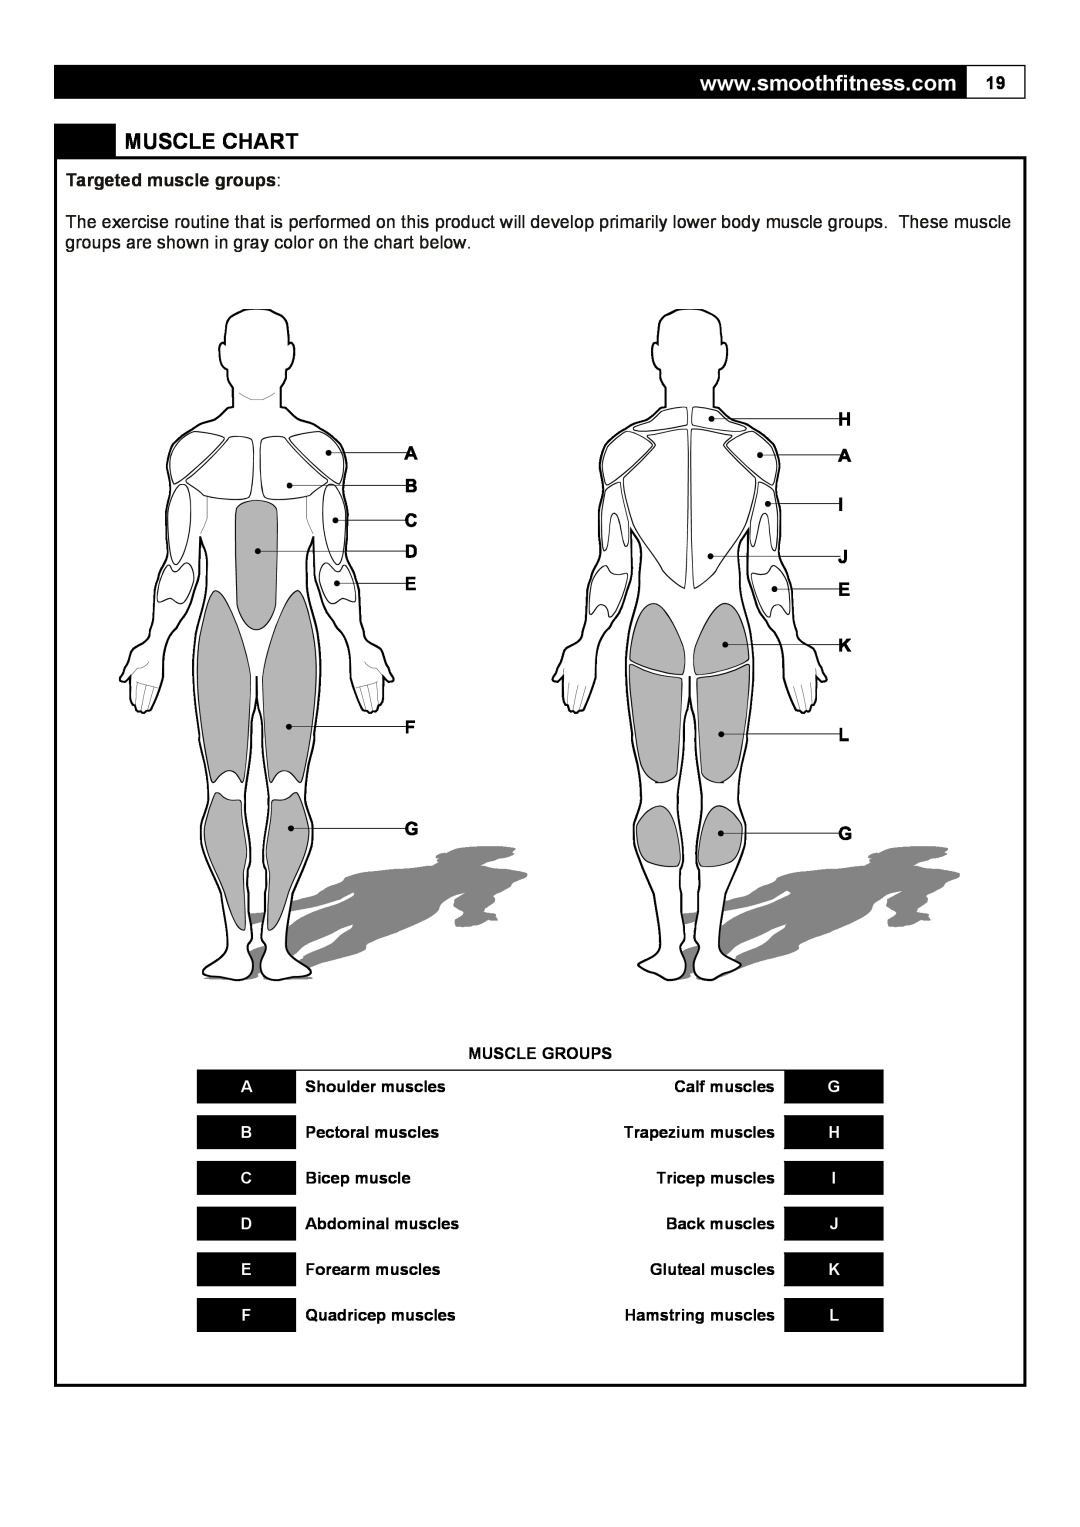 Smooth Fitness 5.65I Muscle Chart, Targeted muscle groups, Muscle Groups, Shoulder muscles, Calf muscles, Pectoral muscles 